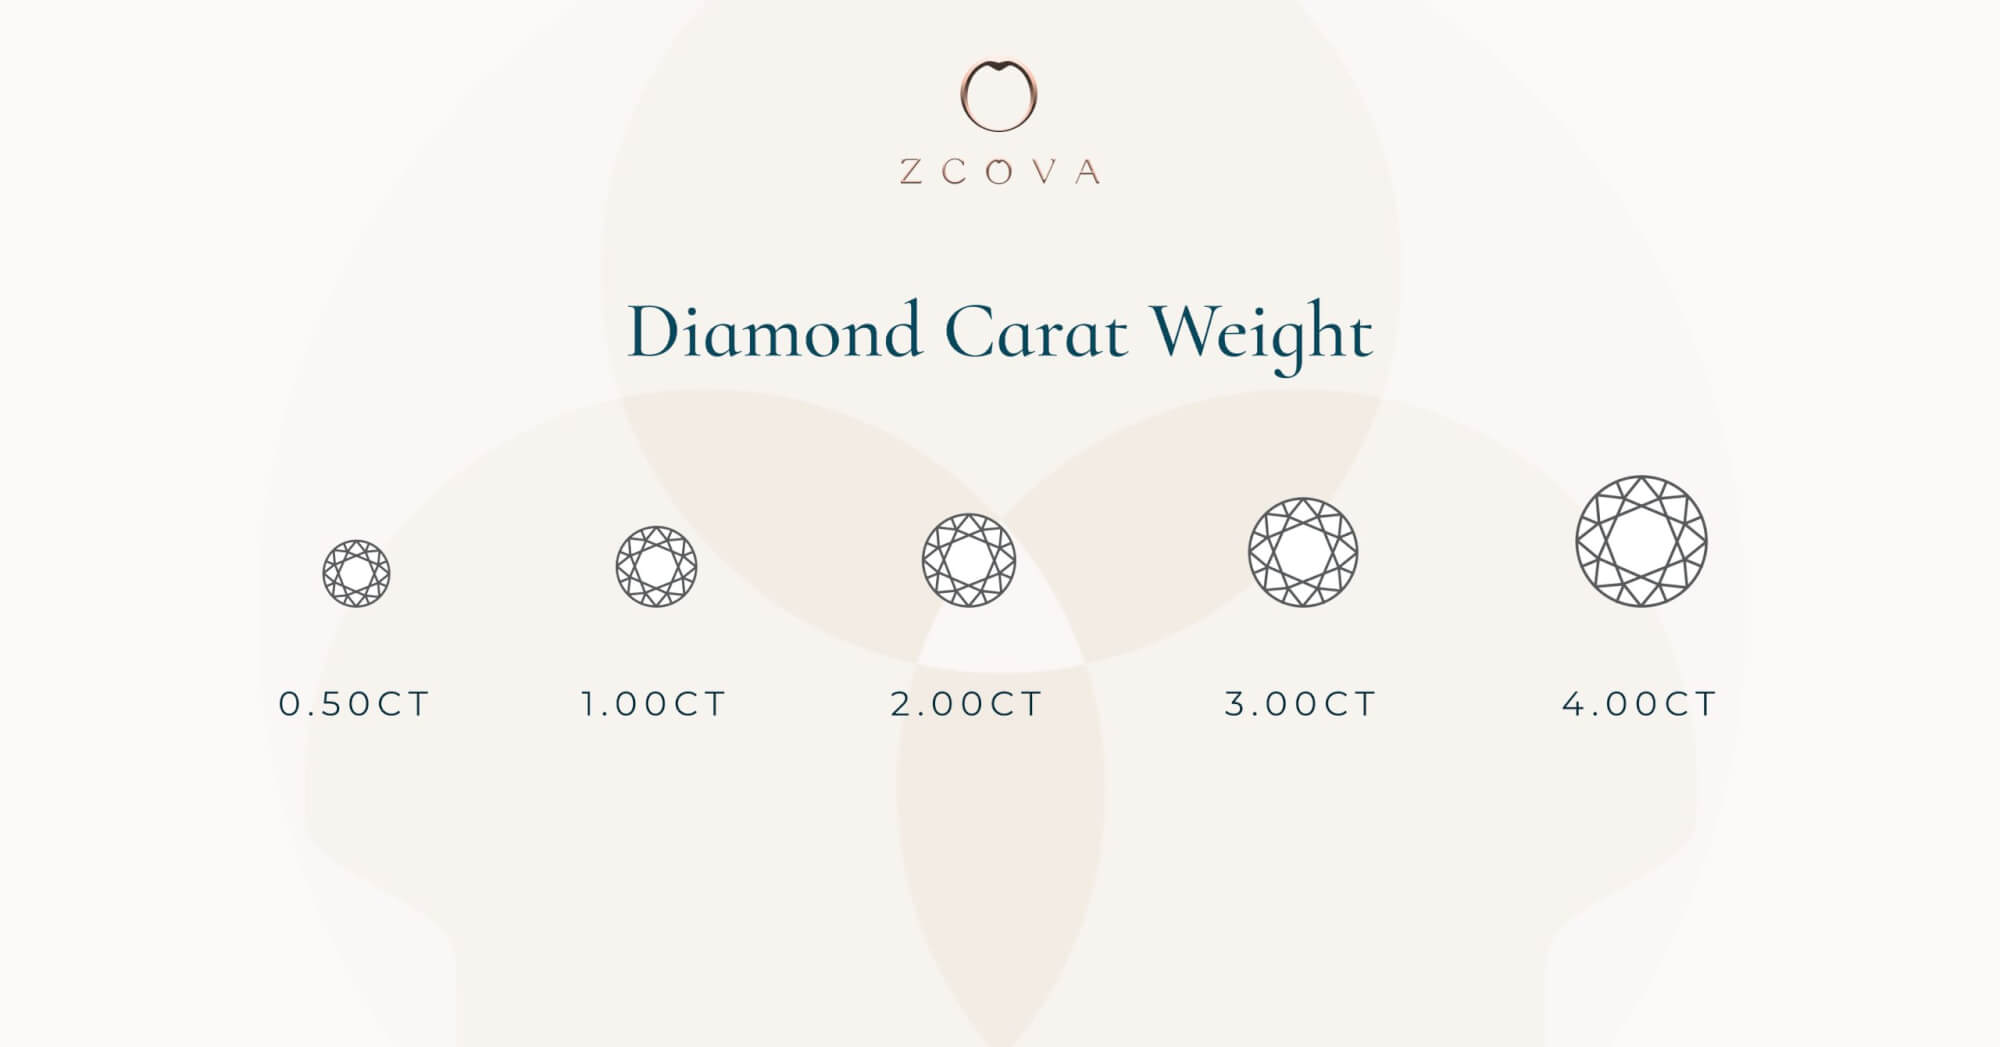 Chart of diamond carat weight with size indication scale